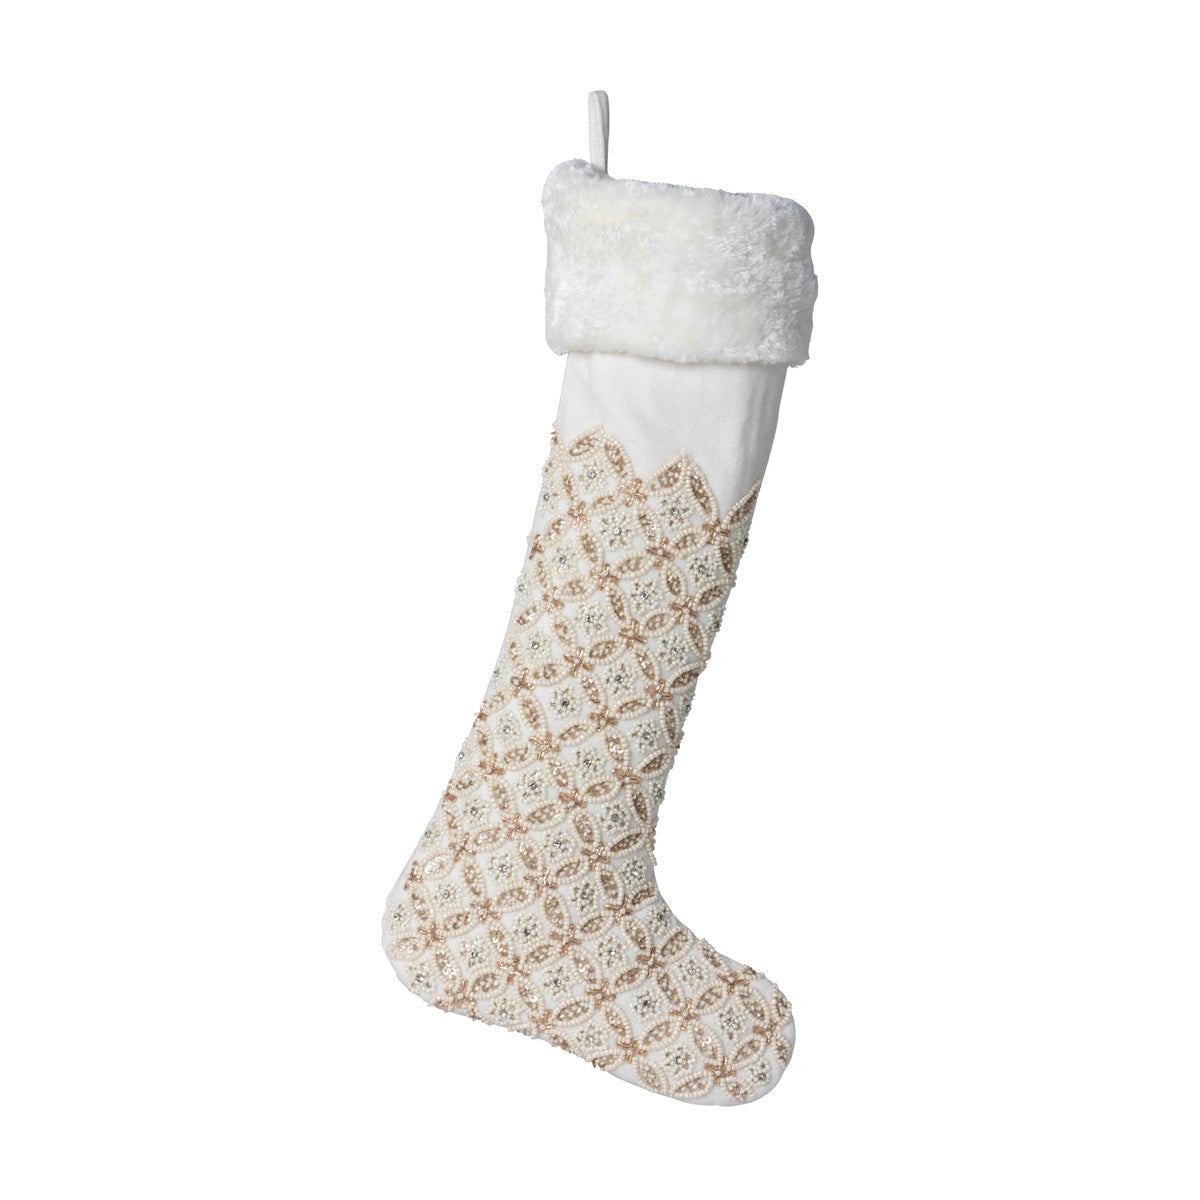 White and Beige Beaded Stocking